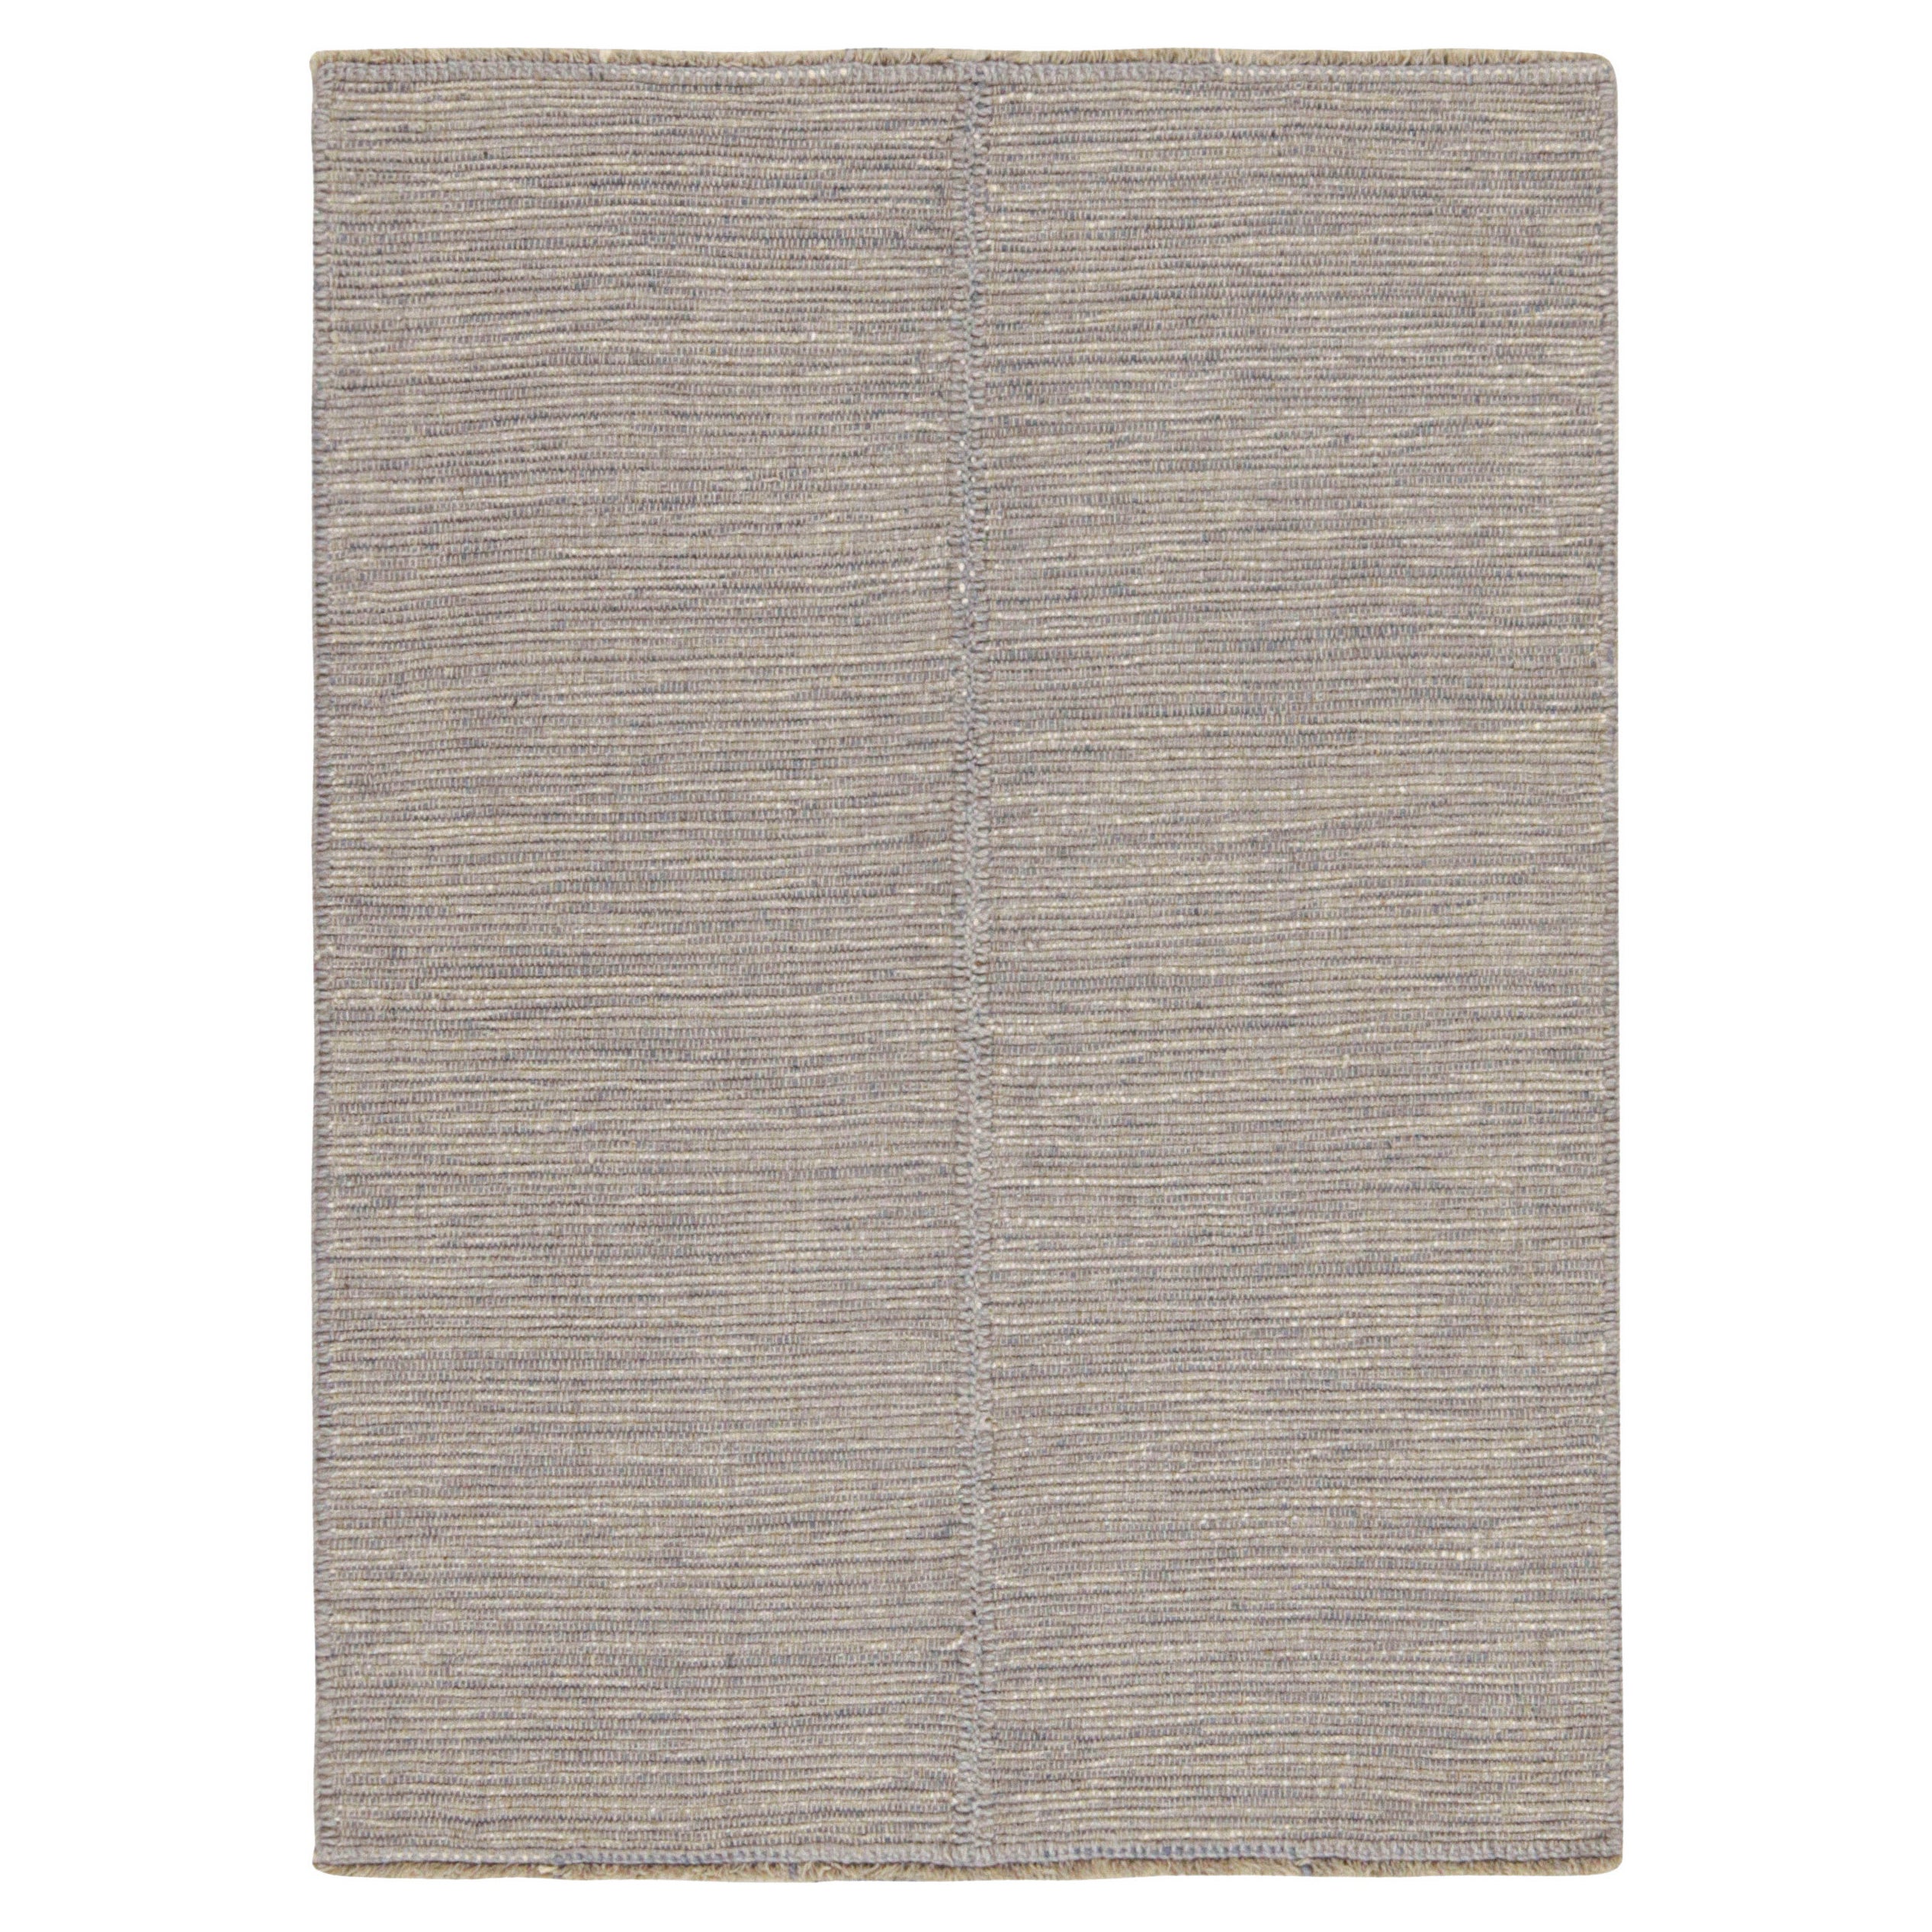 Rug & Kilim’s Contemporary Kilim Rug in Greige with Blue Accents